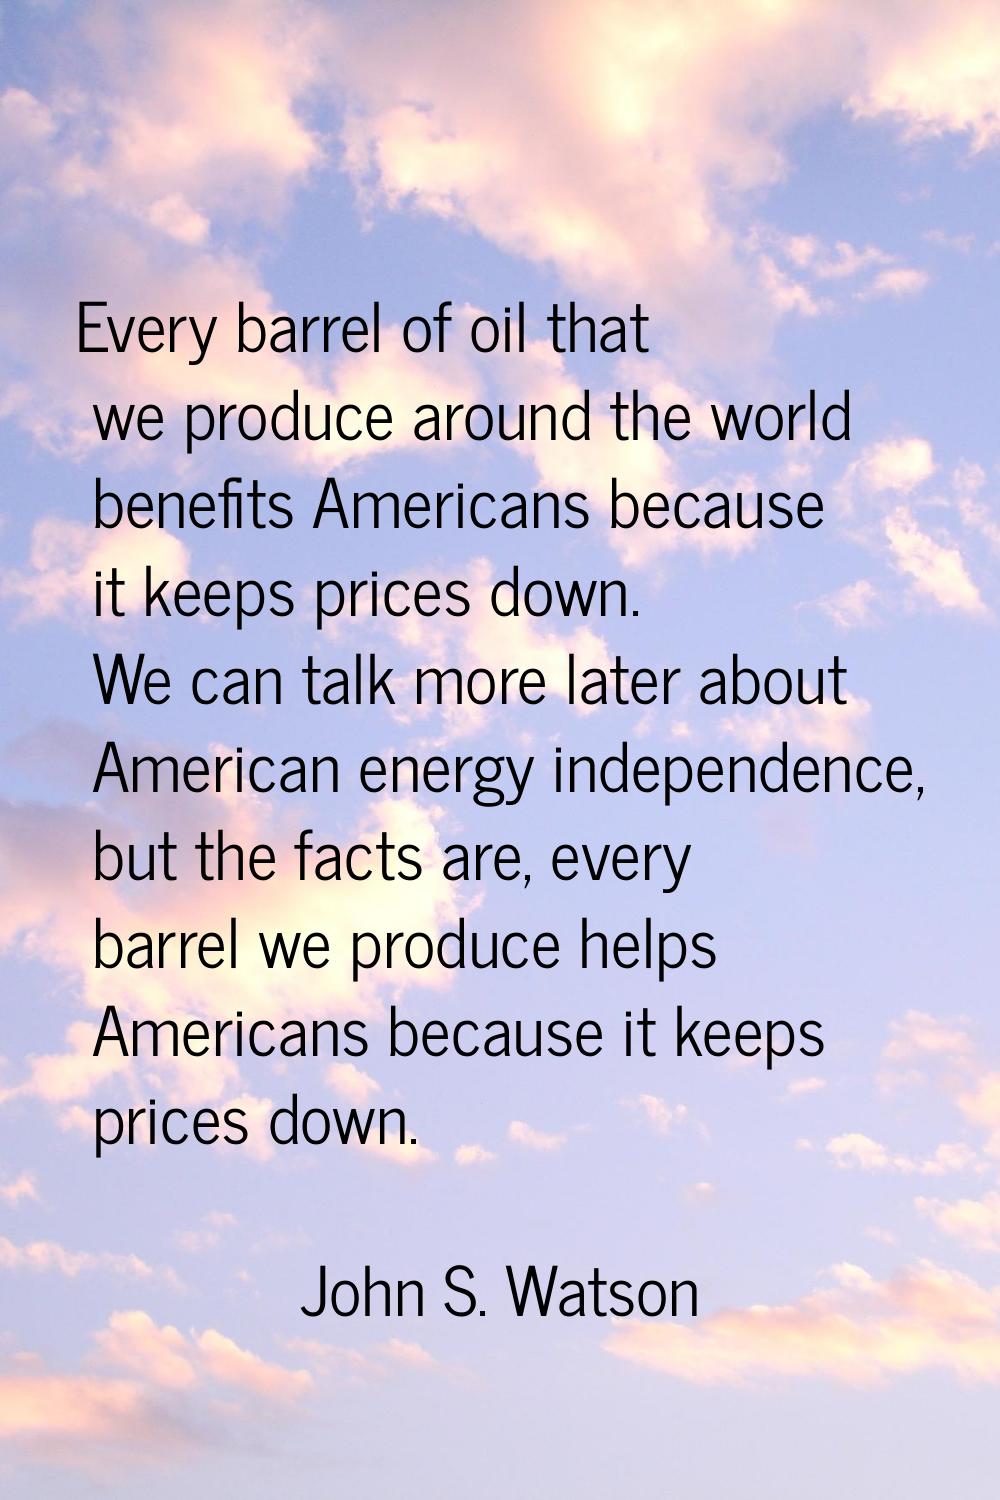 Every barrel of oil that we produce around the world benefits Americans because it keeps prices dow